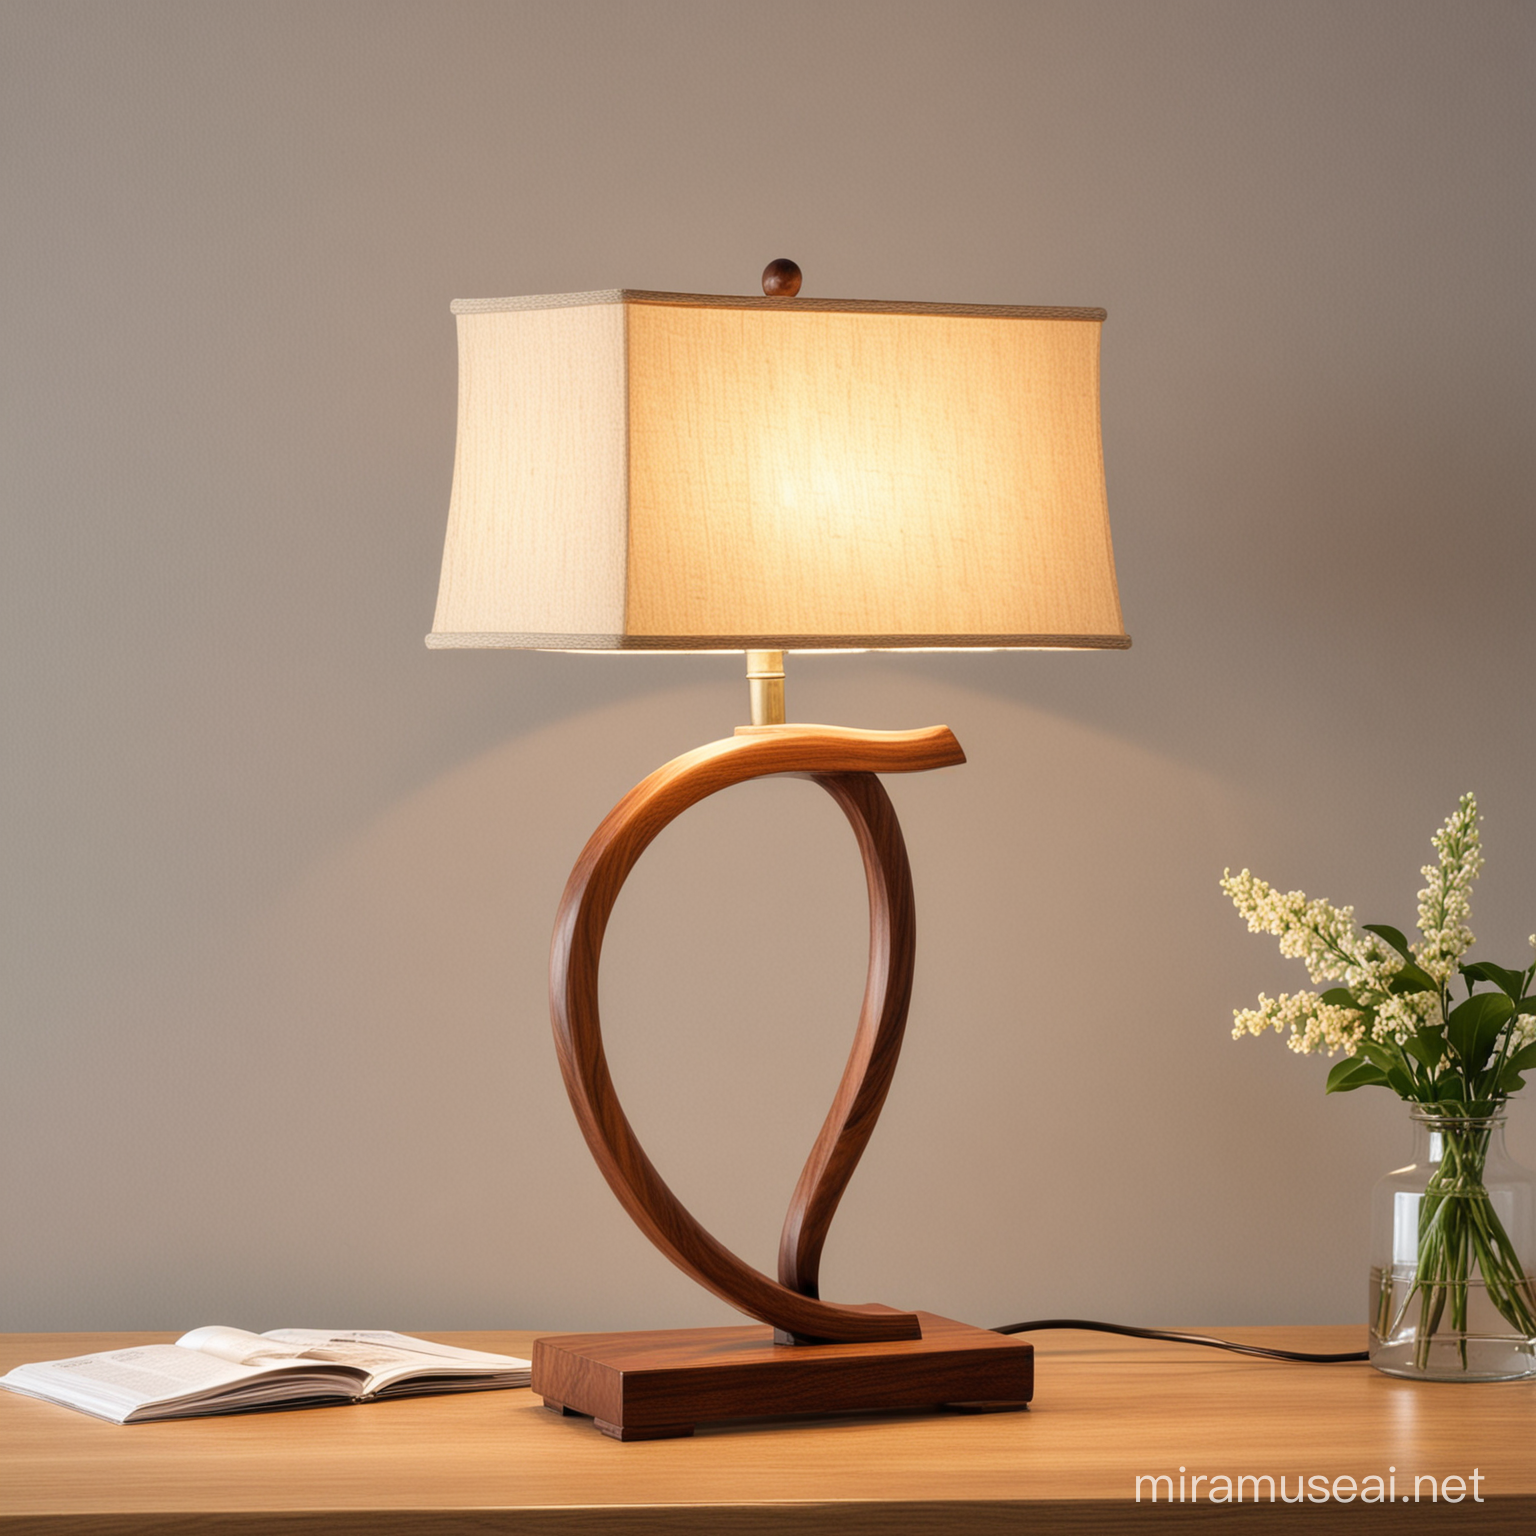 classic table lamp, wood, curved